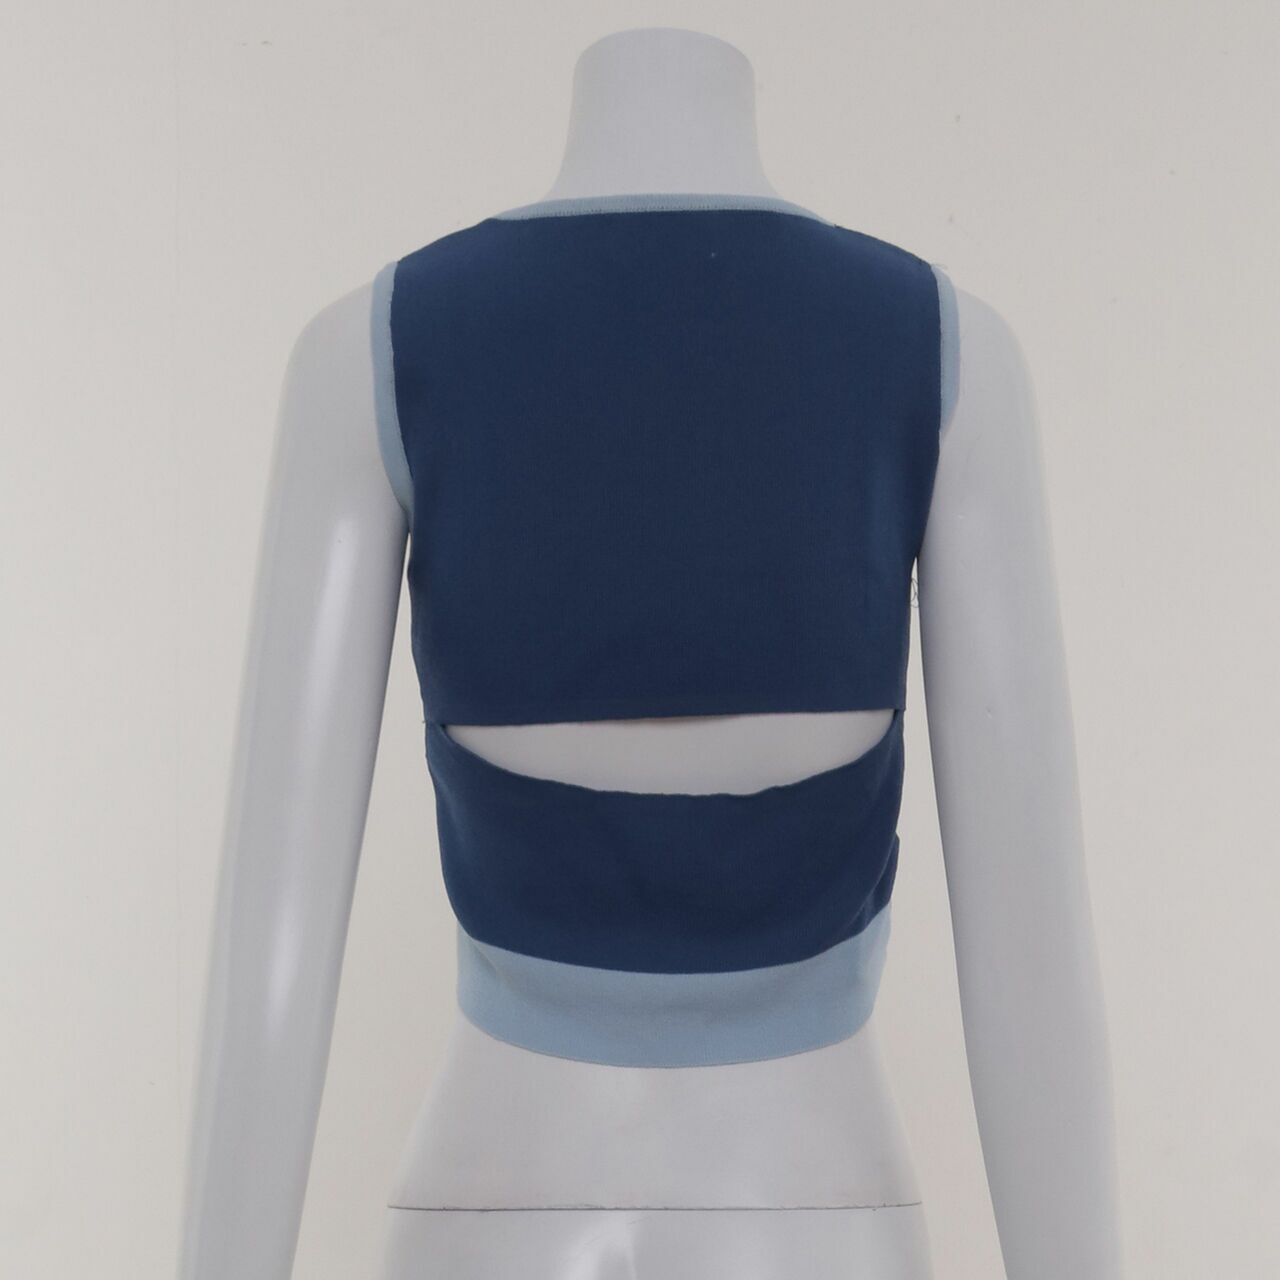 Orgeo Official Blue Sleeveless